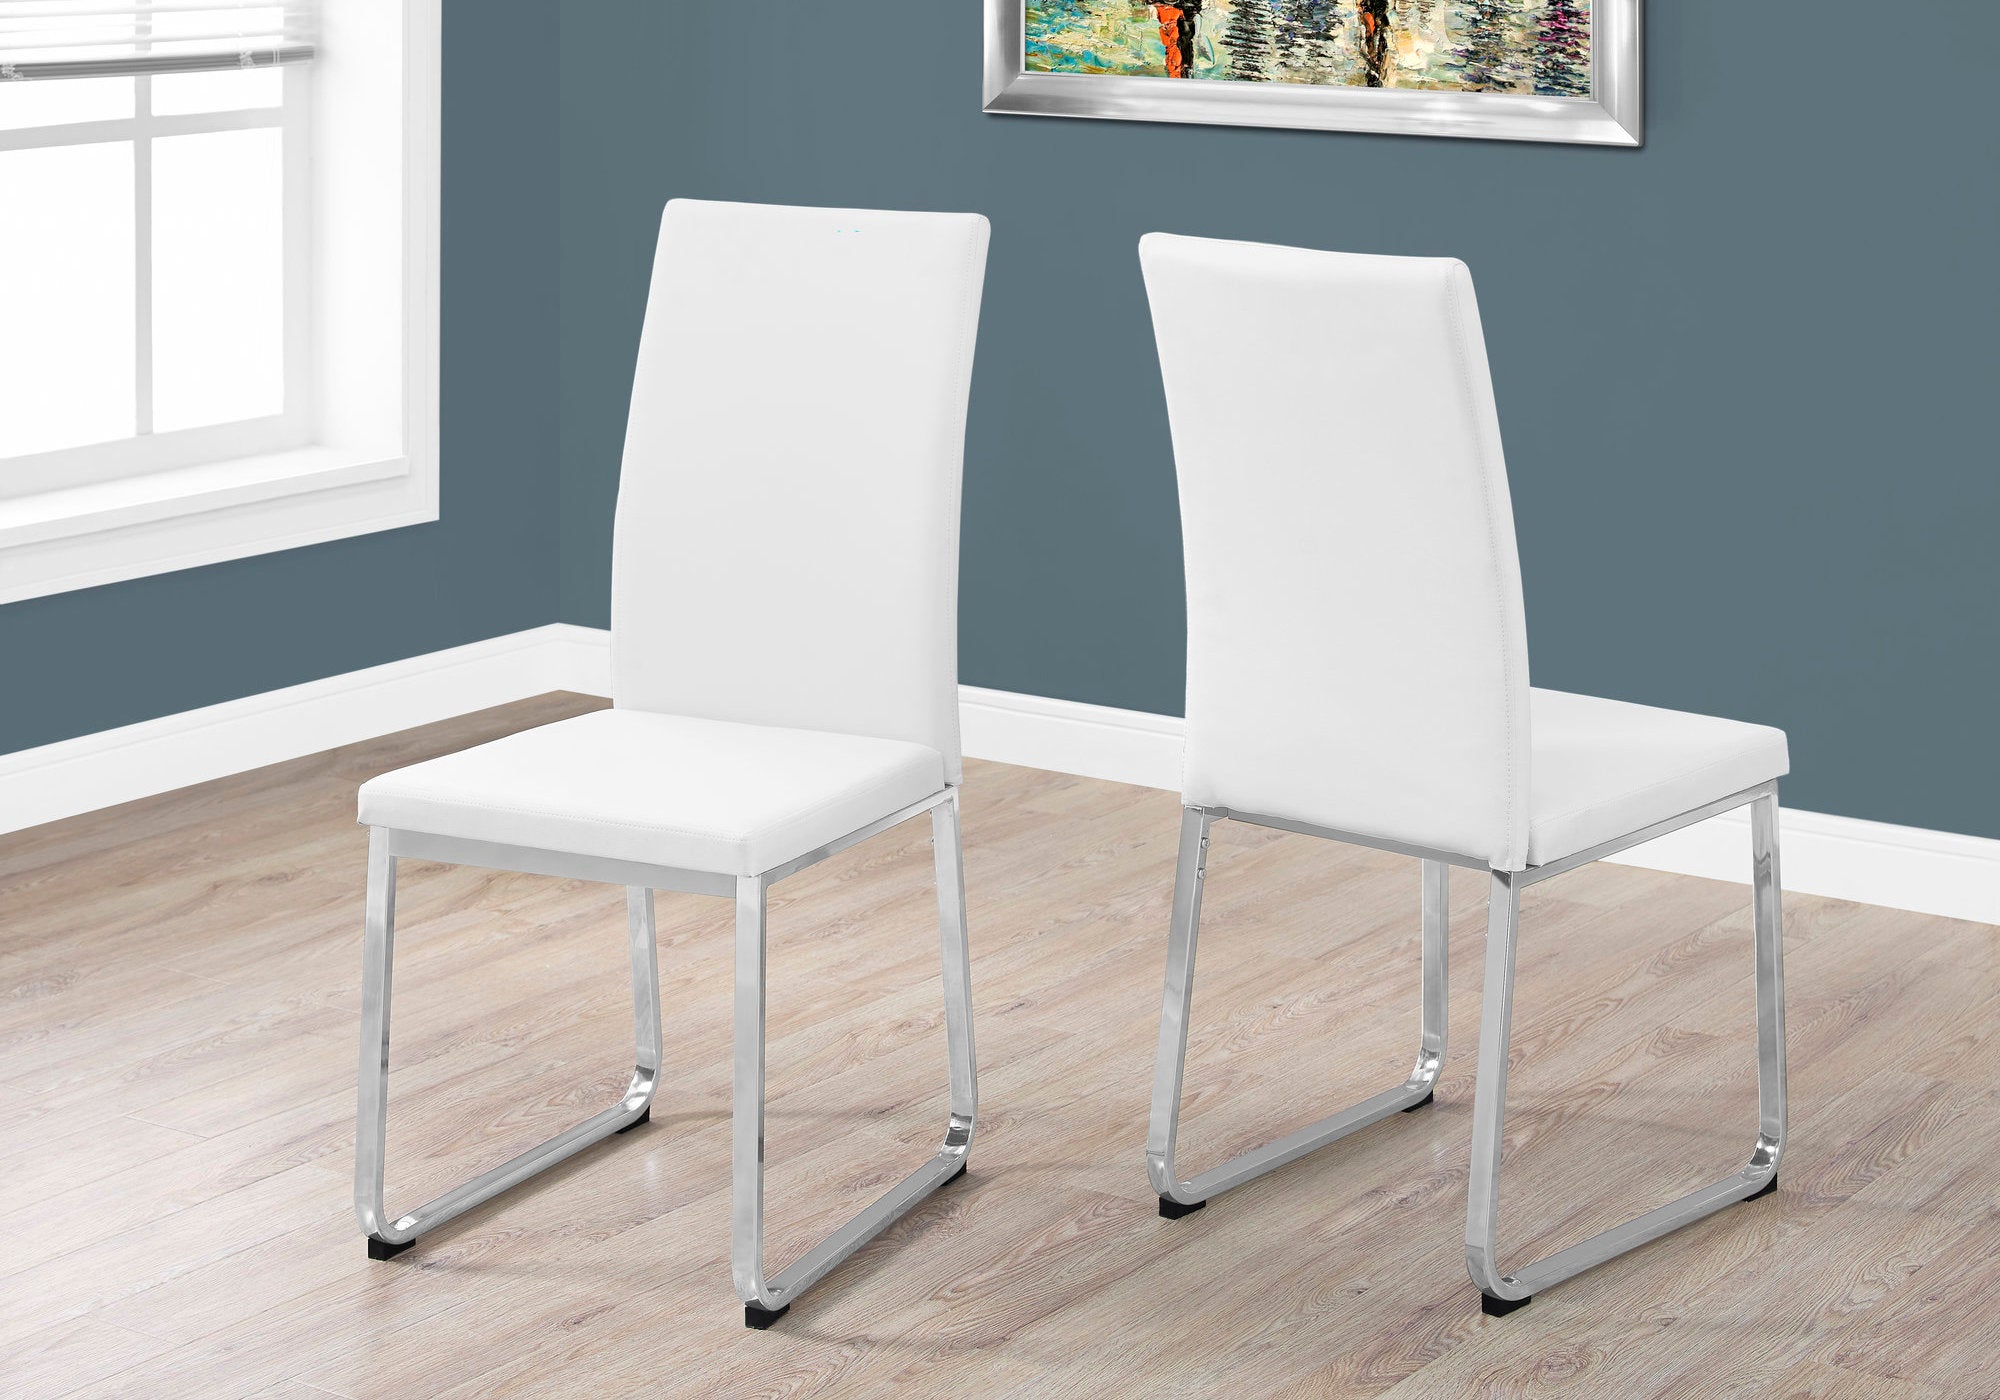 MN-481093    Dining Chair, Set Of 2, Side, Pu Leather-Look, Upholstered, Metal Legs, Kitchen, Dining Room, Leather Look, Metal Legs, White, Chrome, Contemporary, Modern